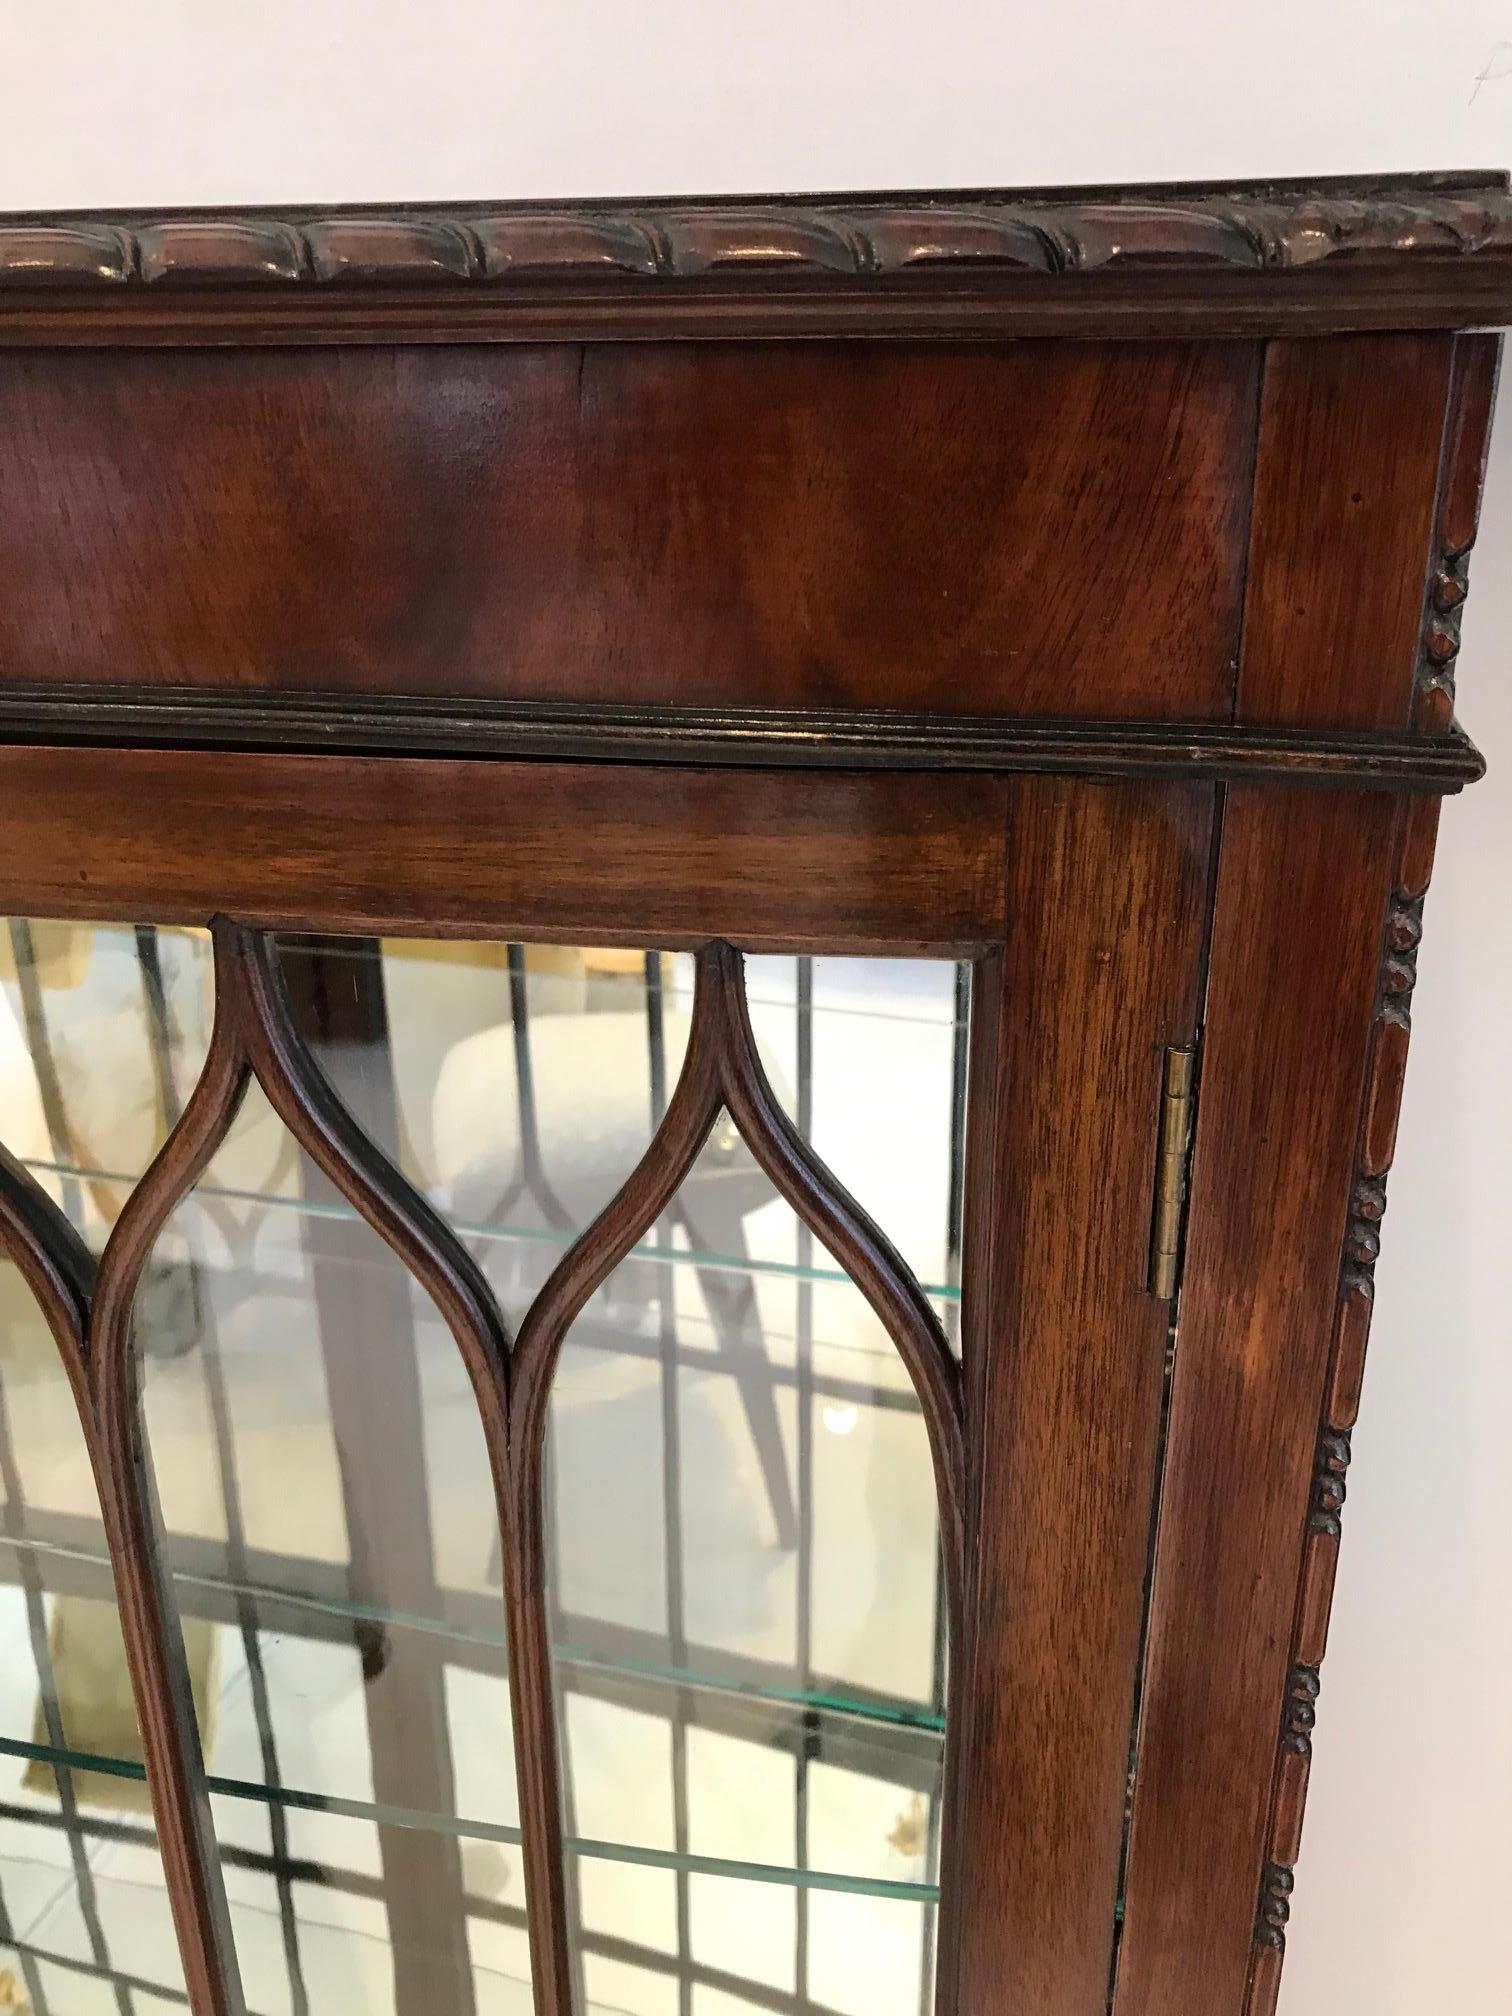 This Chippendale style vitrine was made in early 20th century in England. The all corpus is entirely mahogany veneered, supported on solid wood cabriole legs which ends with ball and claw. The interior is newly covered with mirrors.